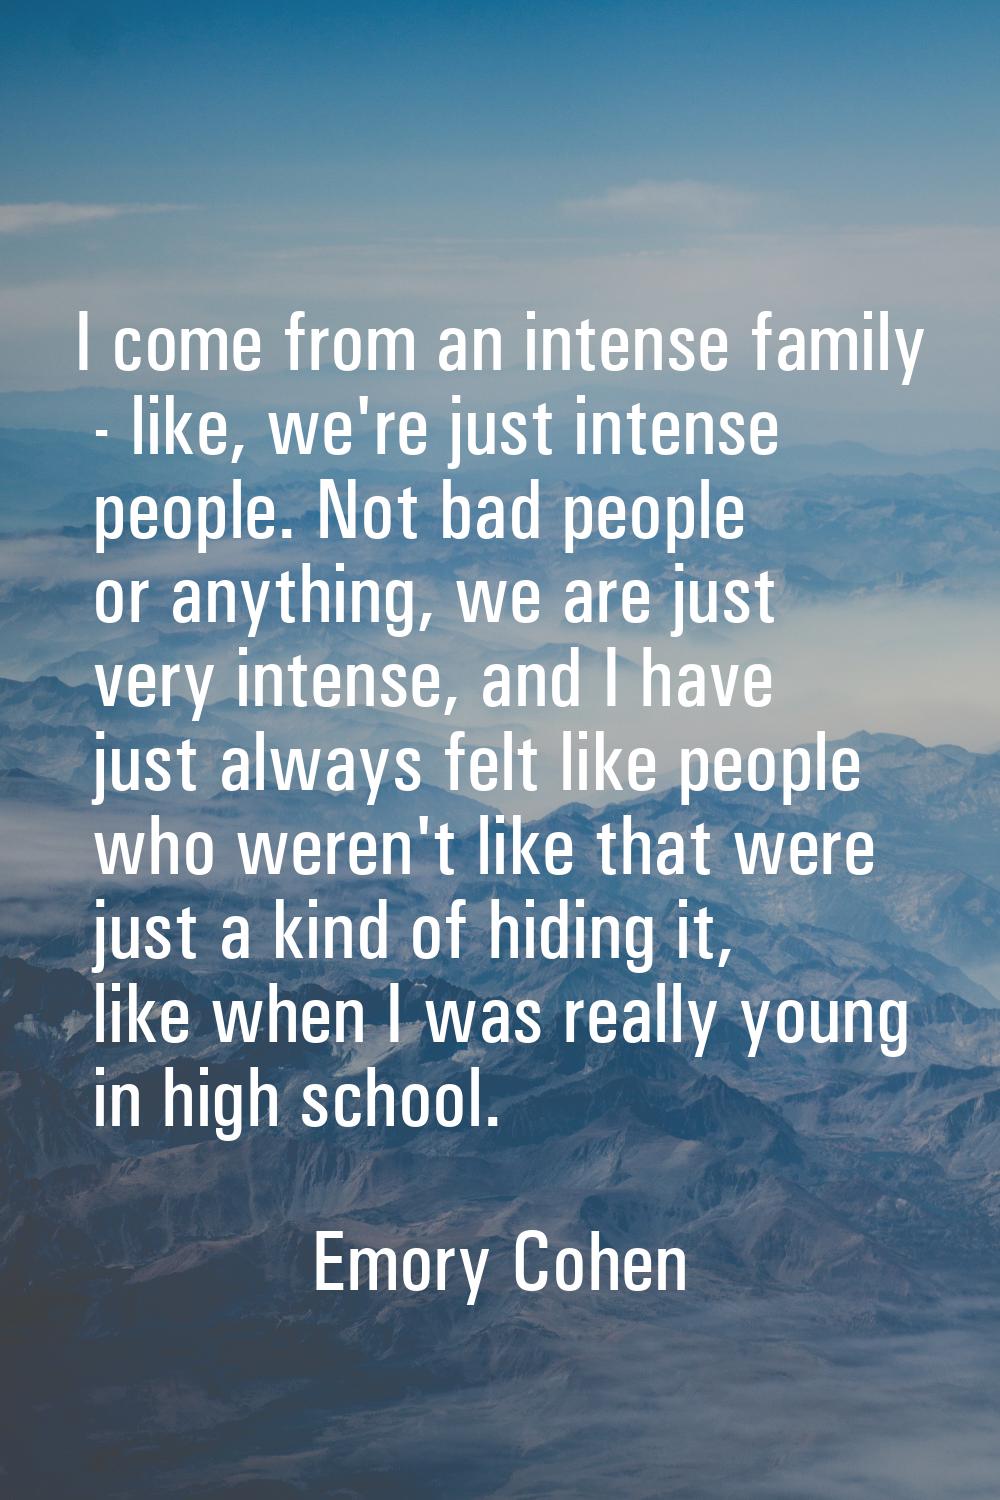 I come from an intense family - like, we're just intense people. Not bad people or anything, we are